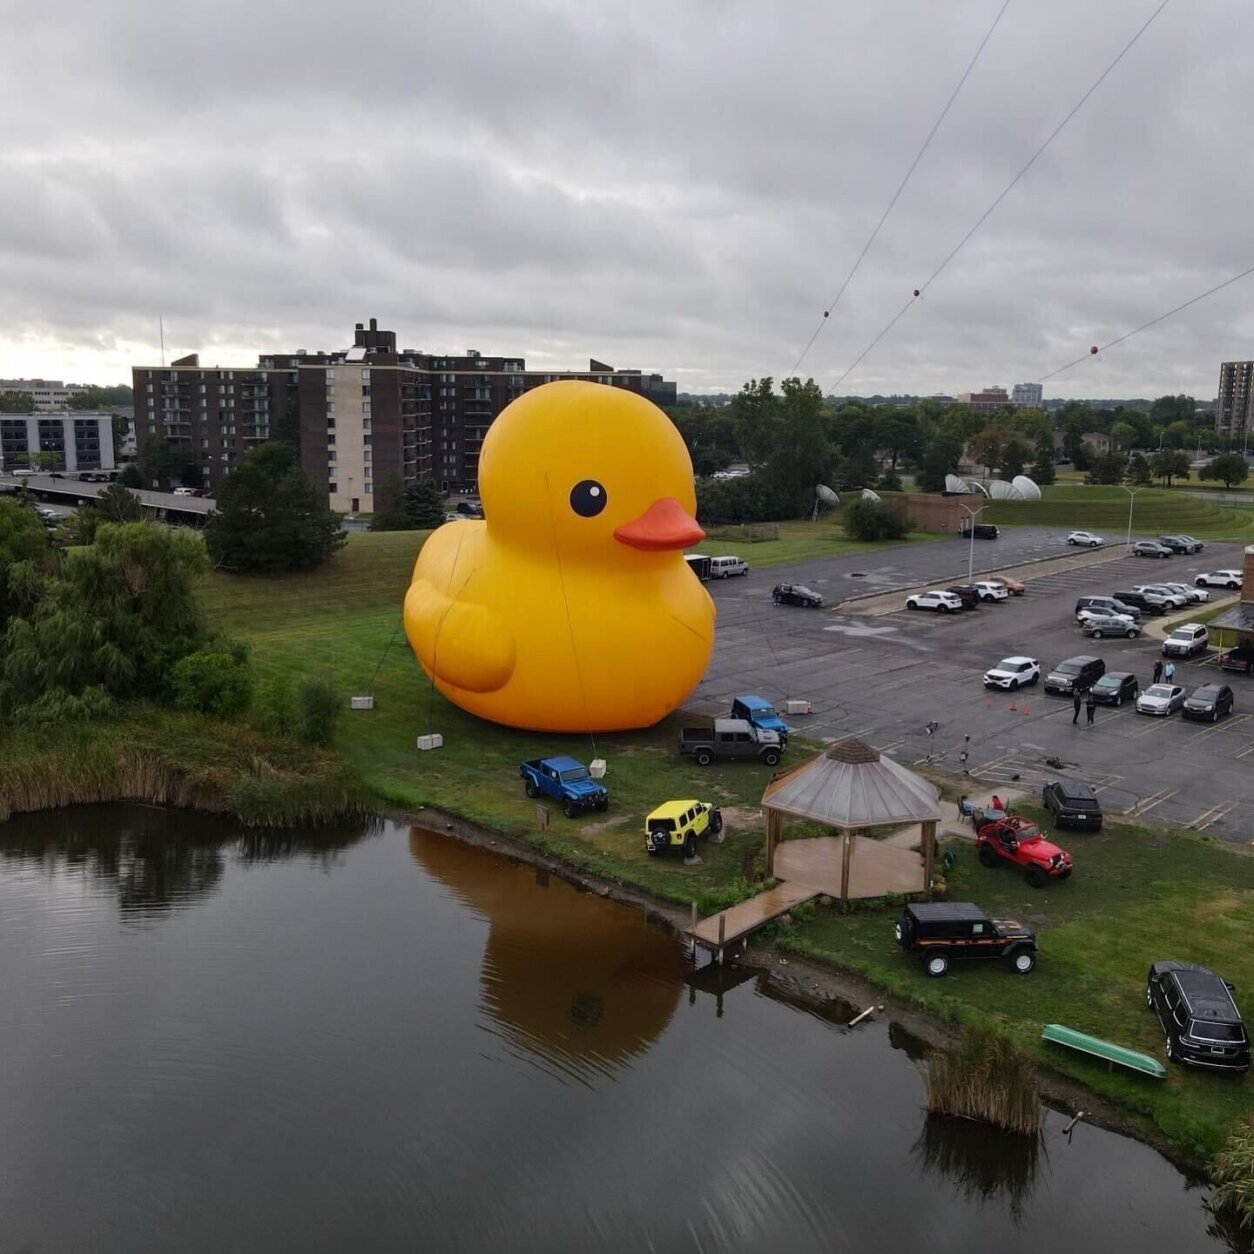 The world's largest rubber duck is coming to Maryland for a spec